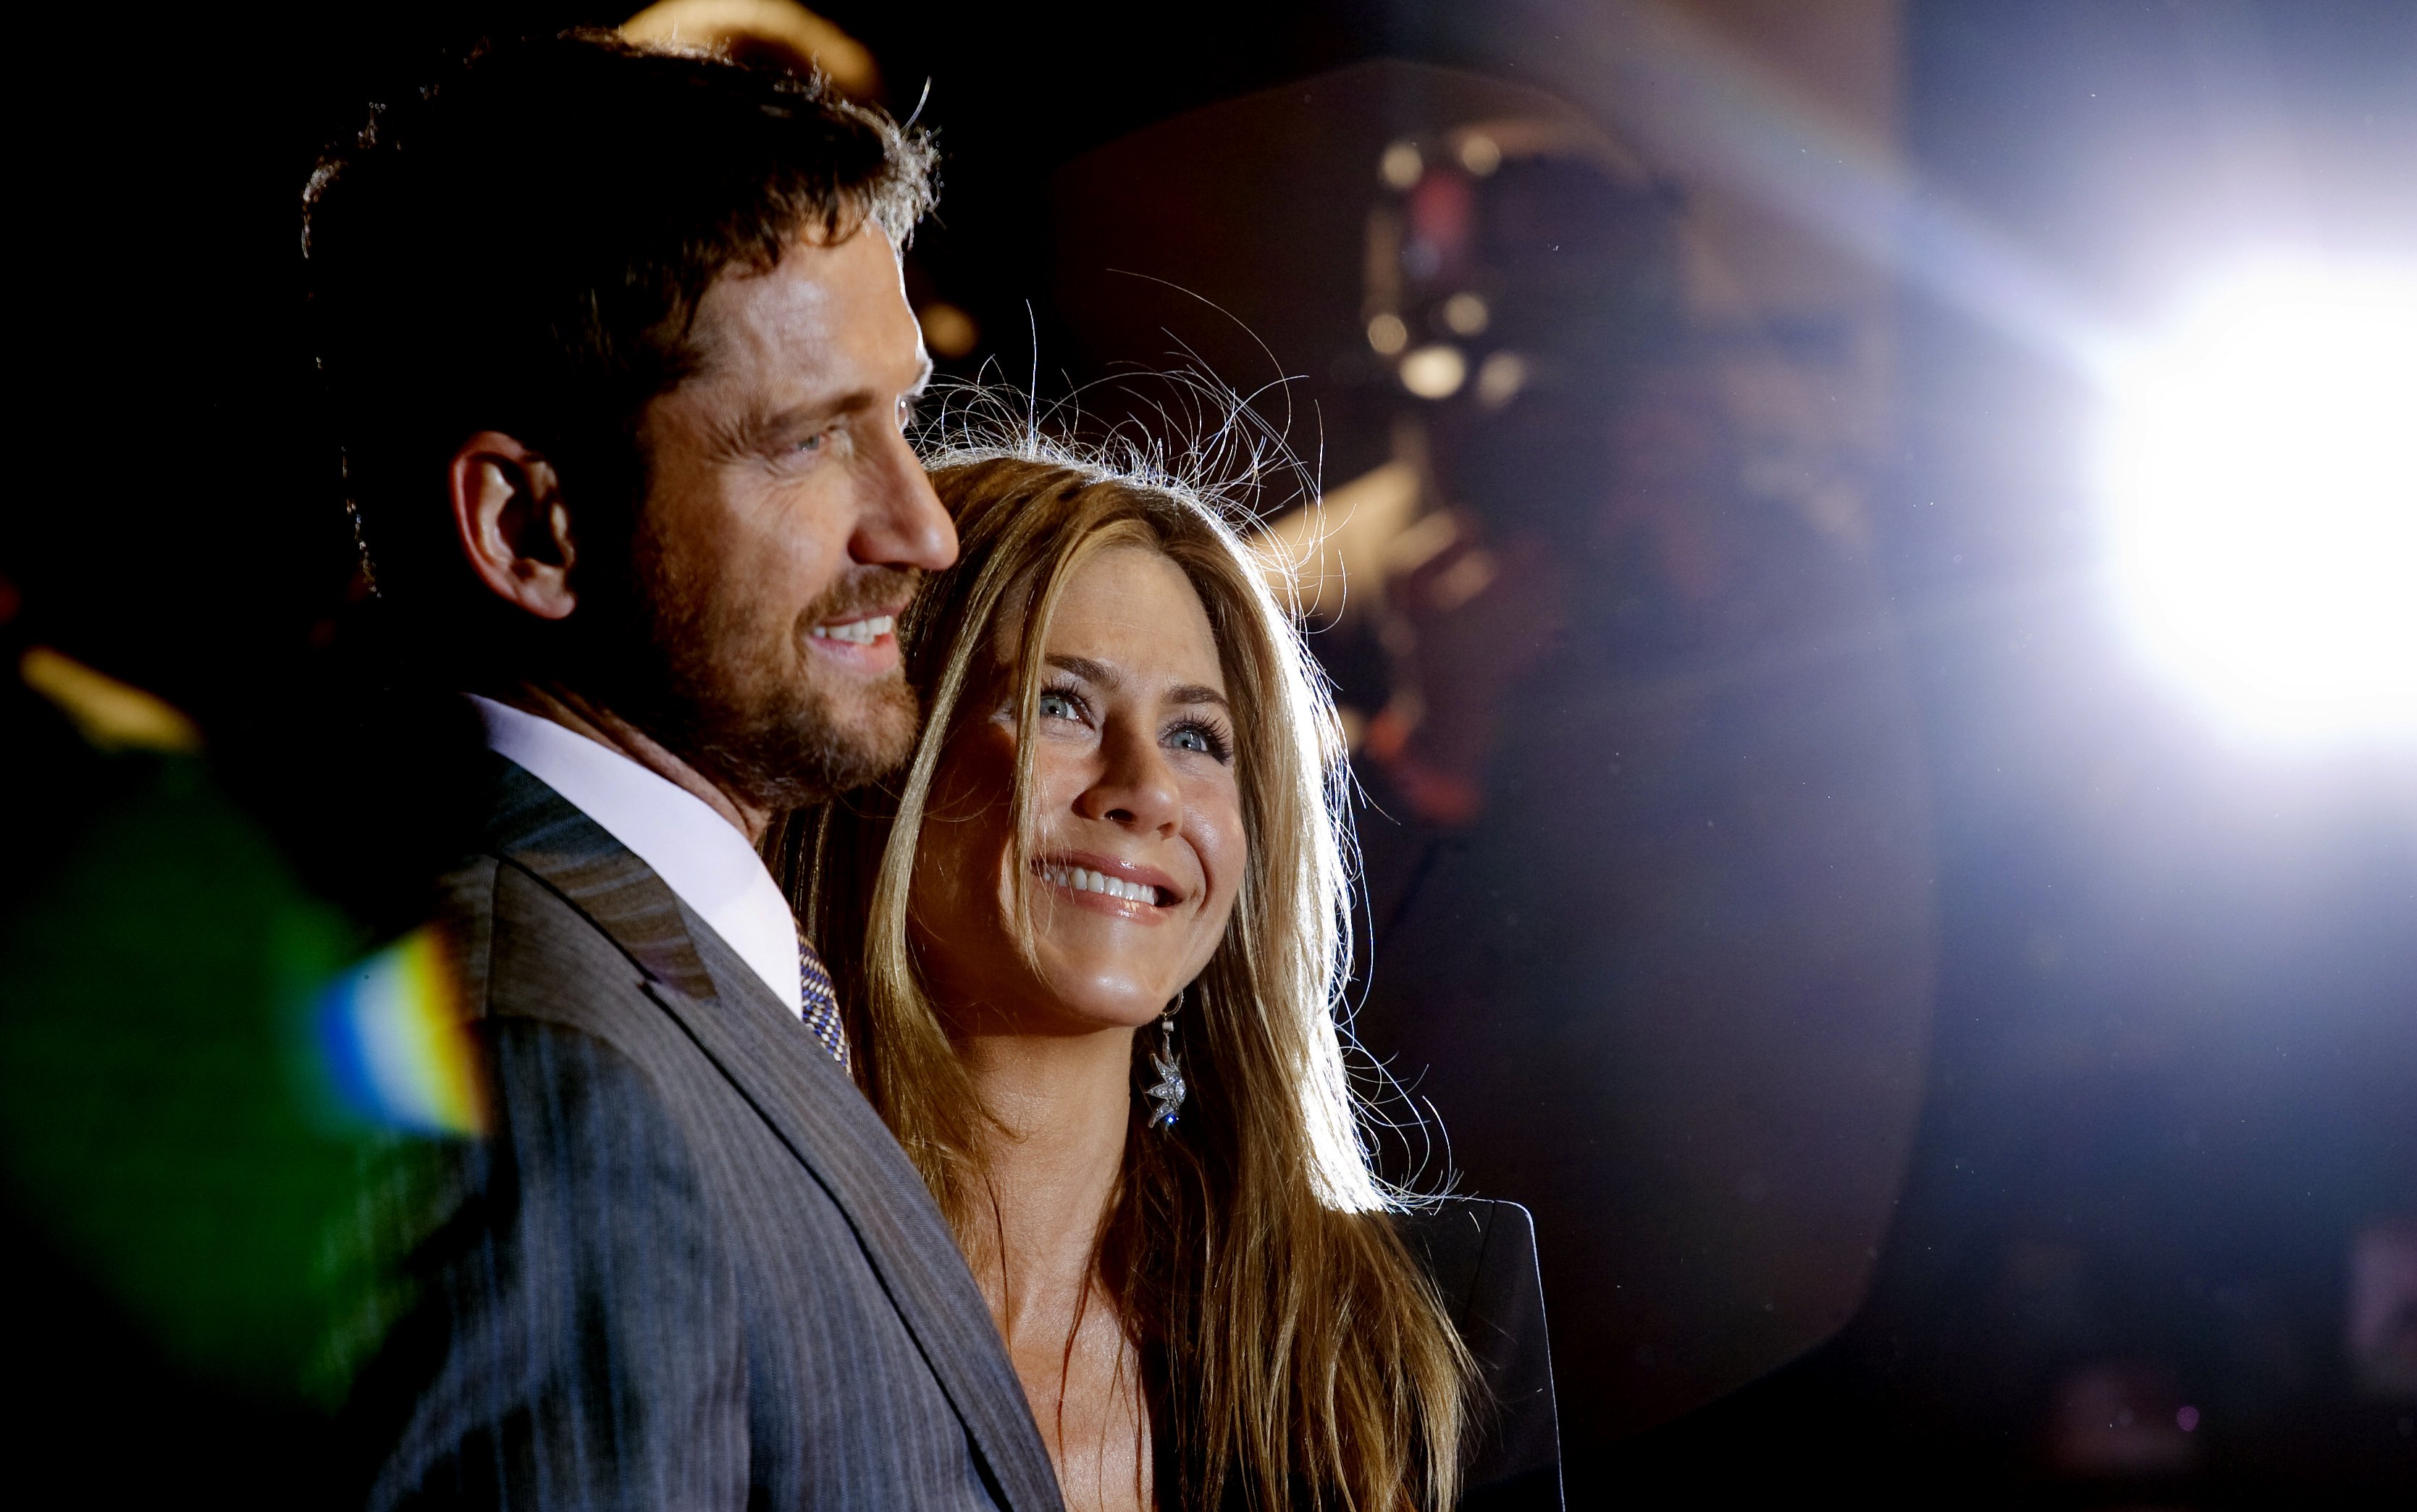 Jennifer Aniston and Gerard Butler at "The Bounty Hunter" premiere at The Vue West End Leicester Square, London. | Source: Getty Images